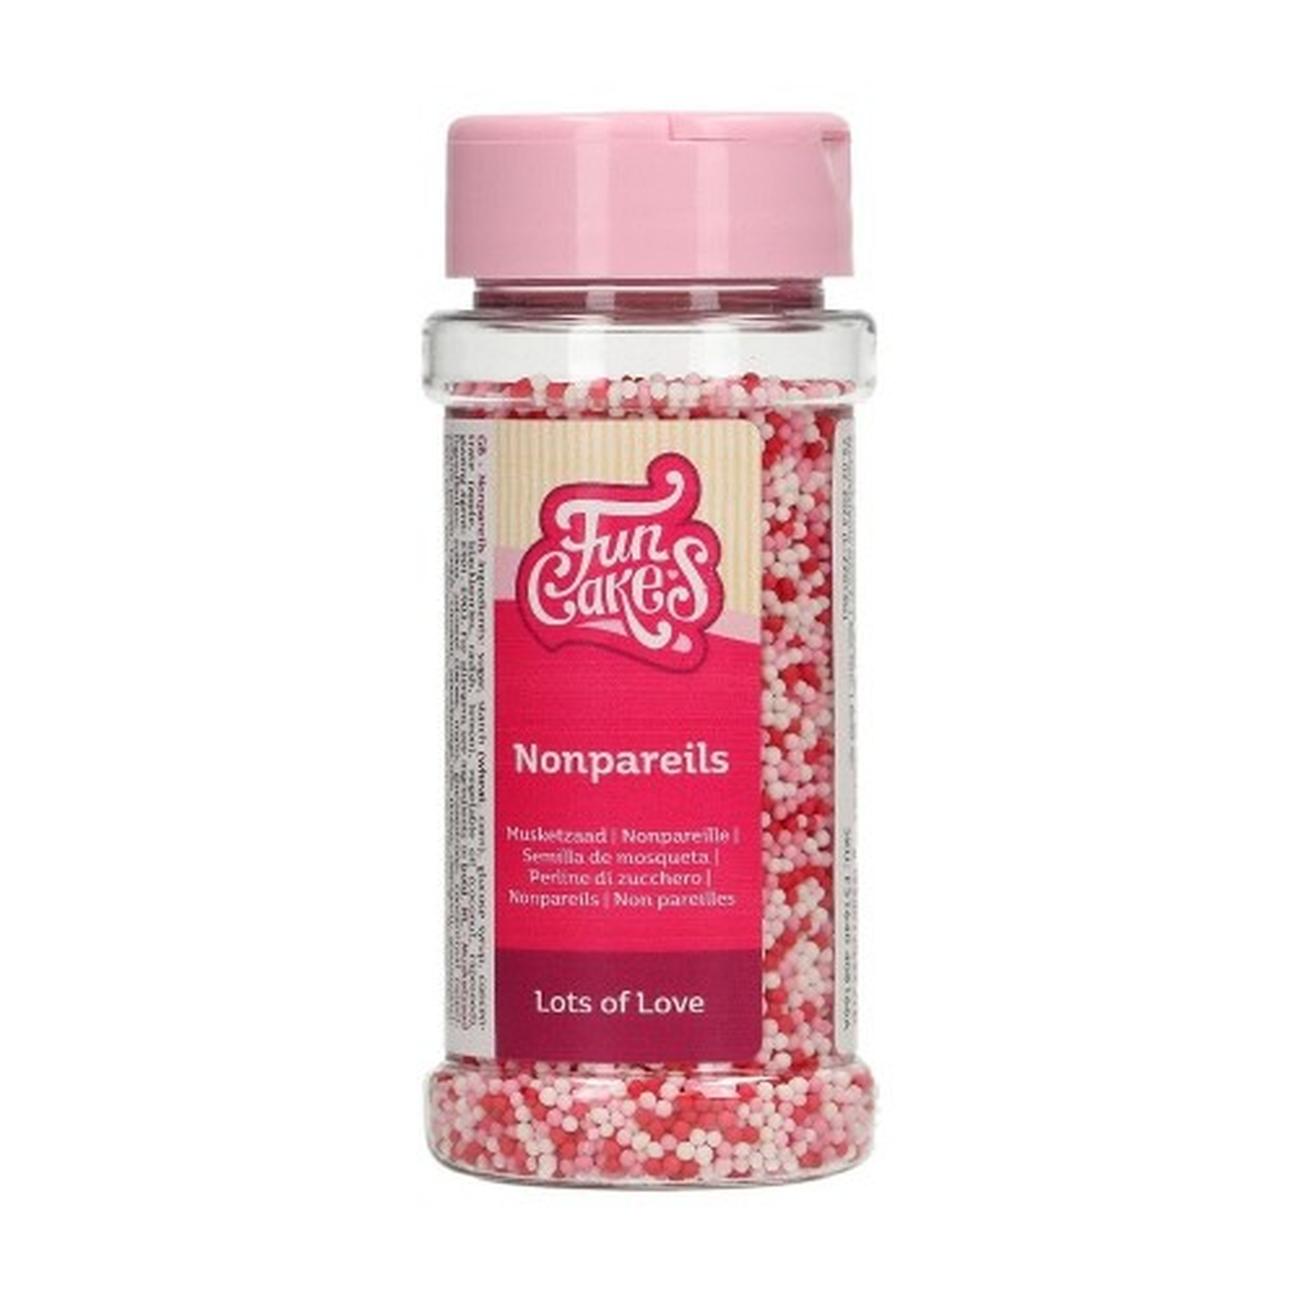 funcakes-lots-of-love-nonpareils-80g - FunCakes Nonpareils Lots of Love 80 g